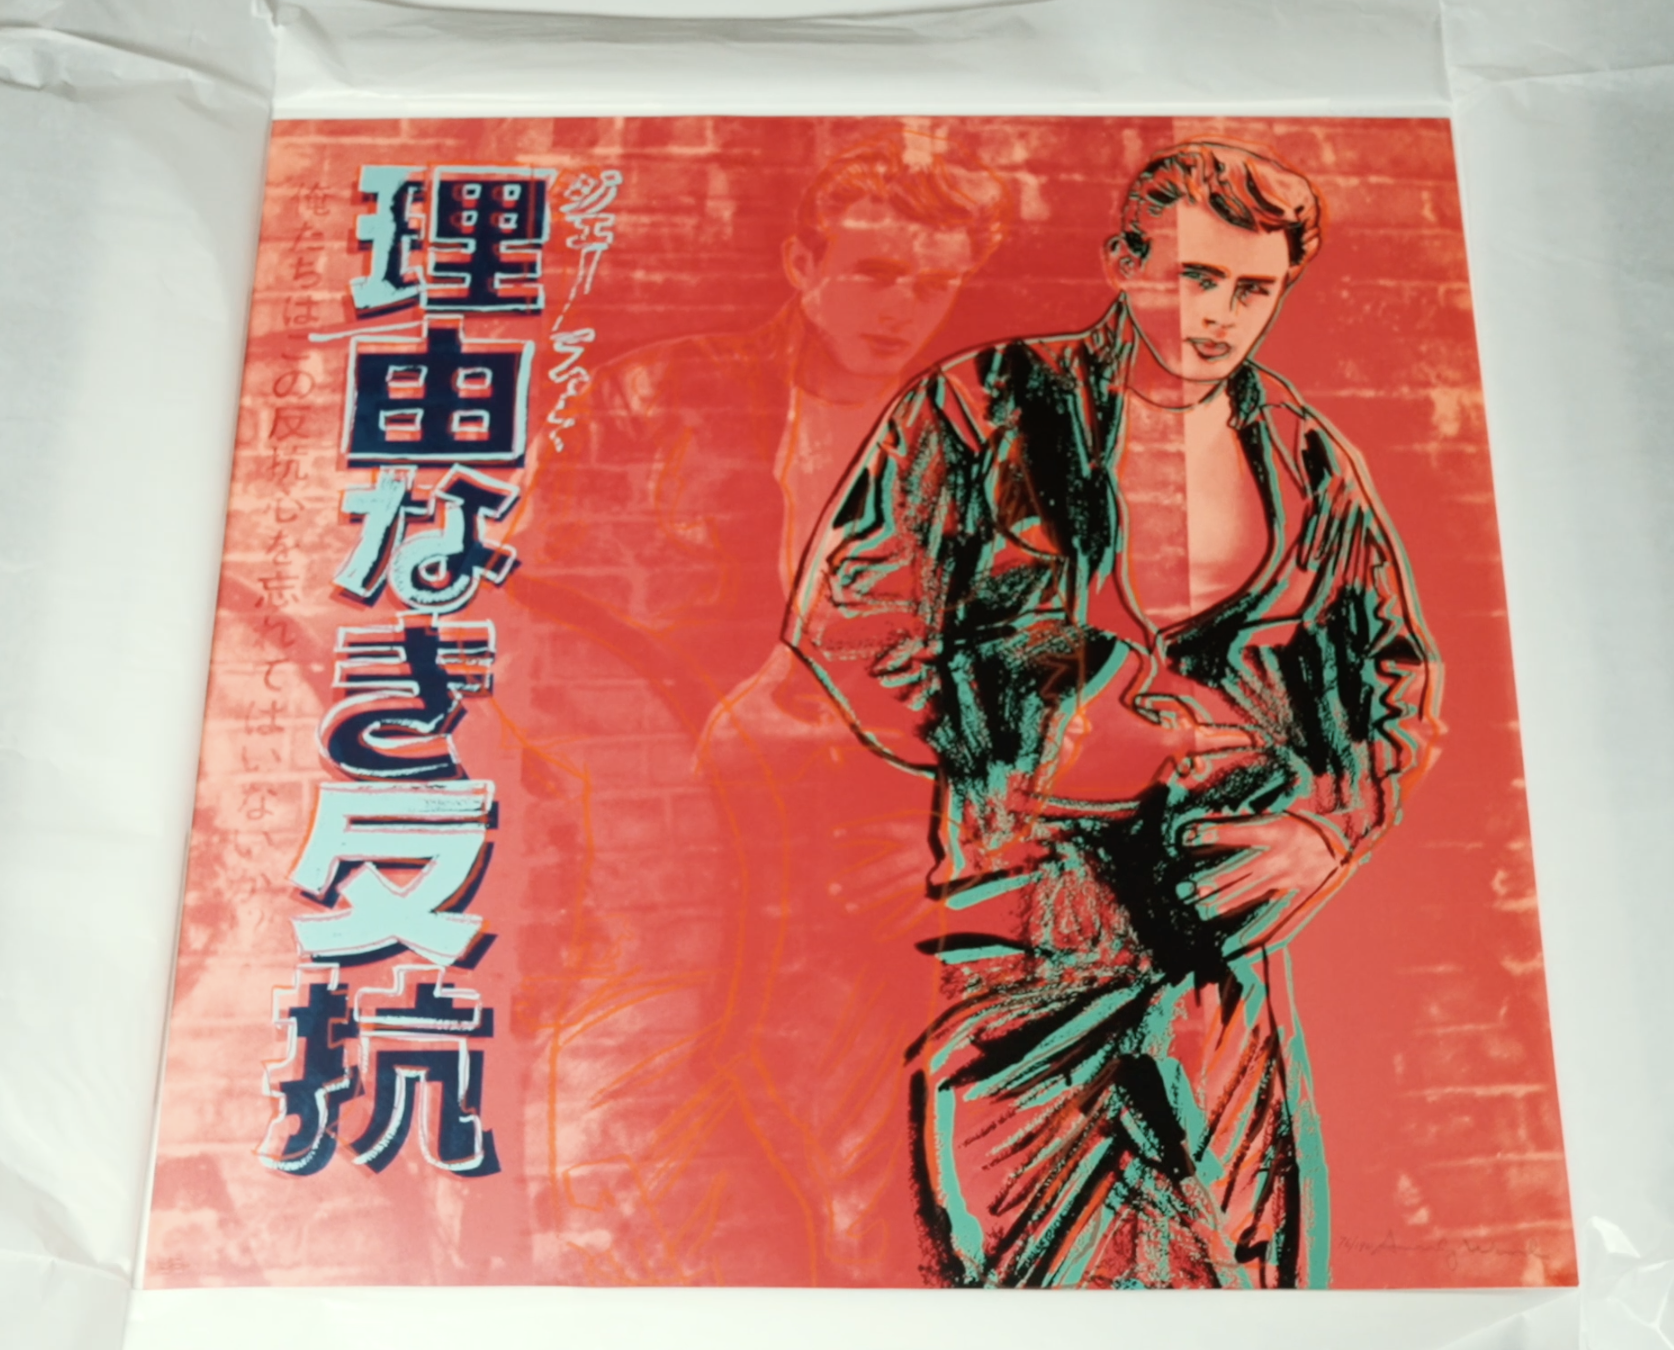 Warhol's Rebel Without a Cause (display)